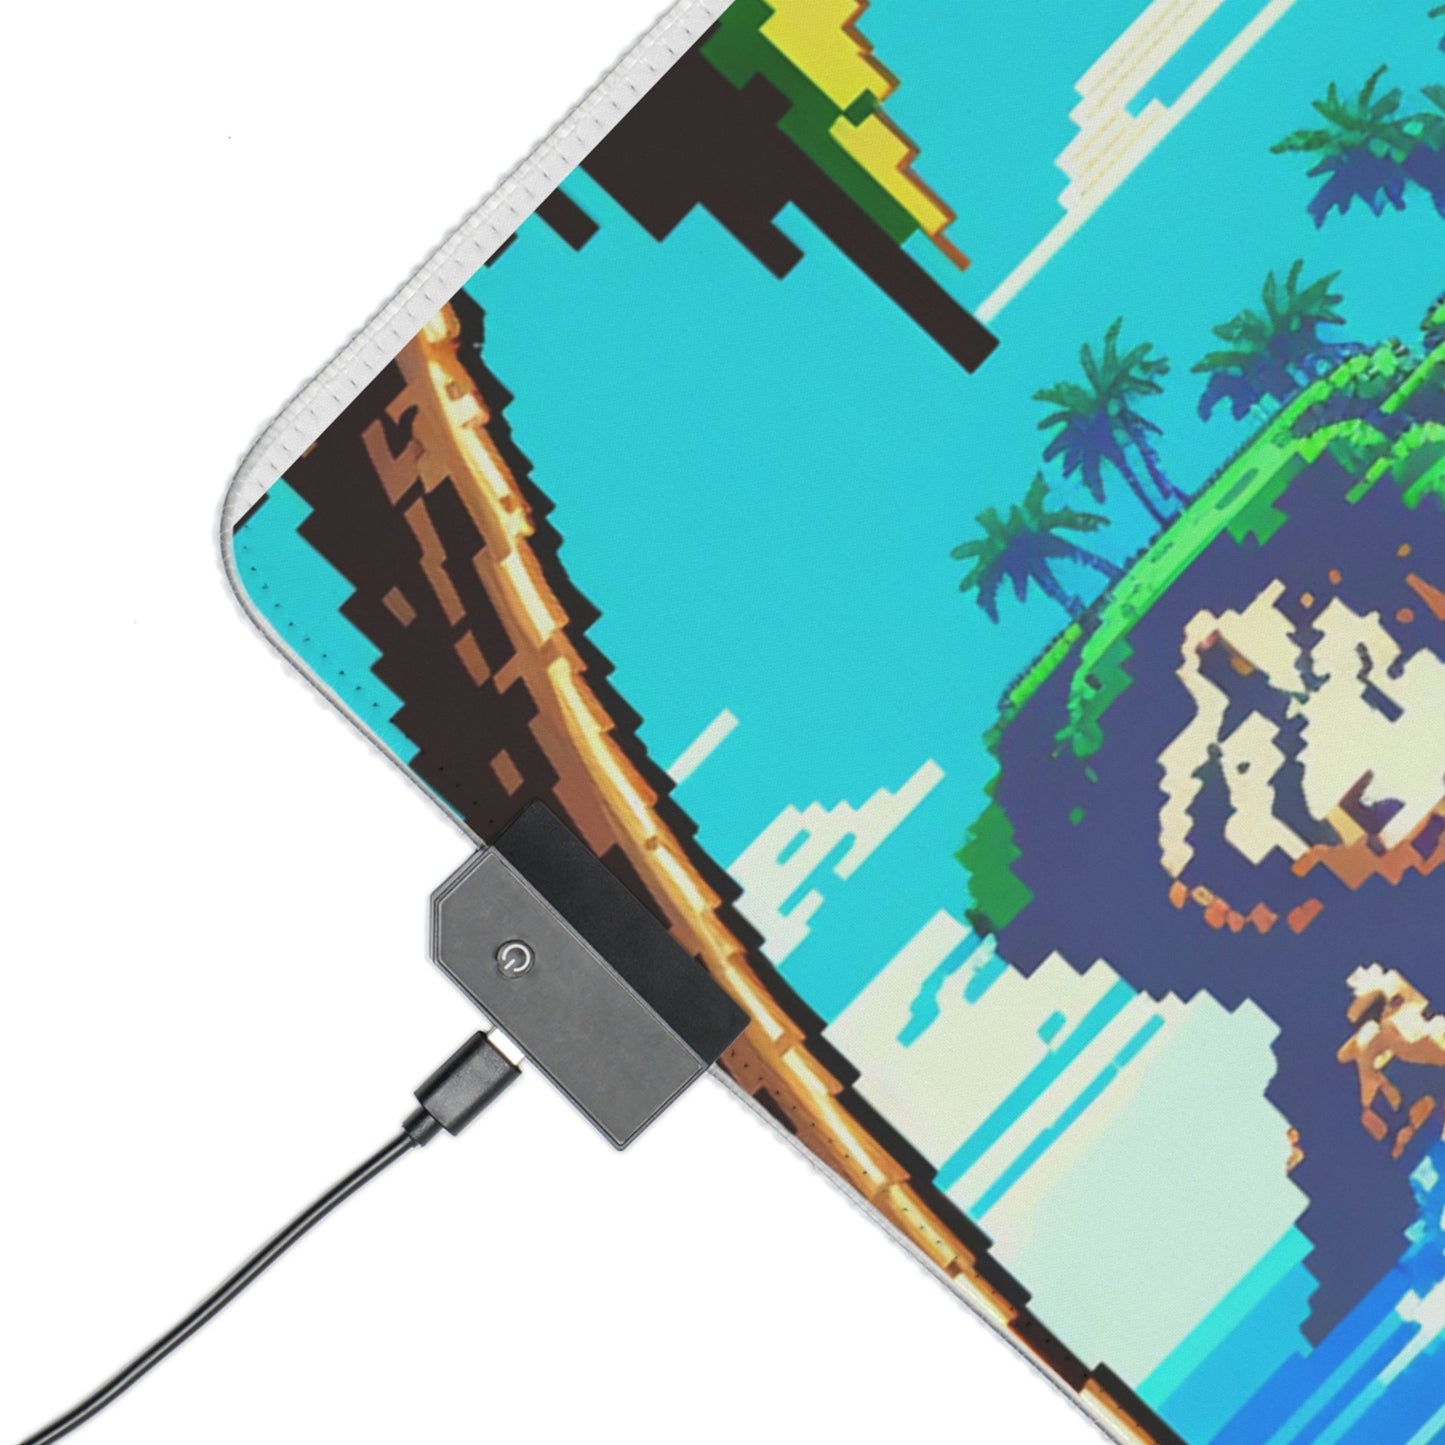 10 Pixel Art Tropical Beach LED Gaming Mouse Pad with 14